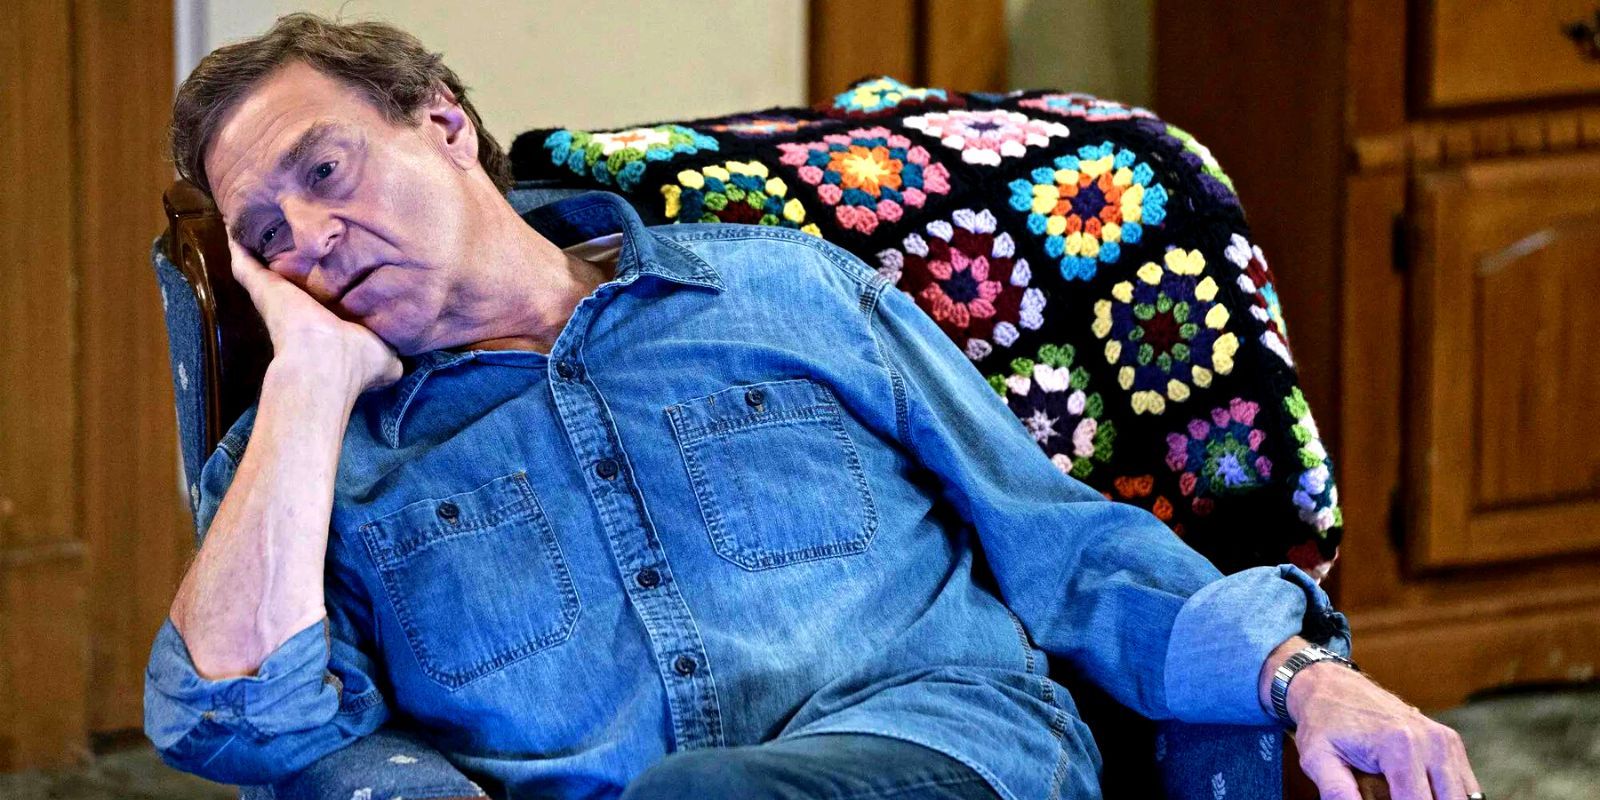 John Goodman slouched on the couch in The Conners